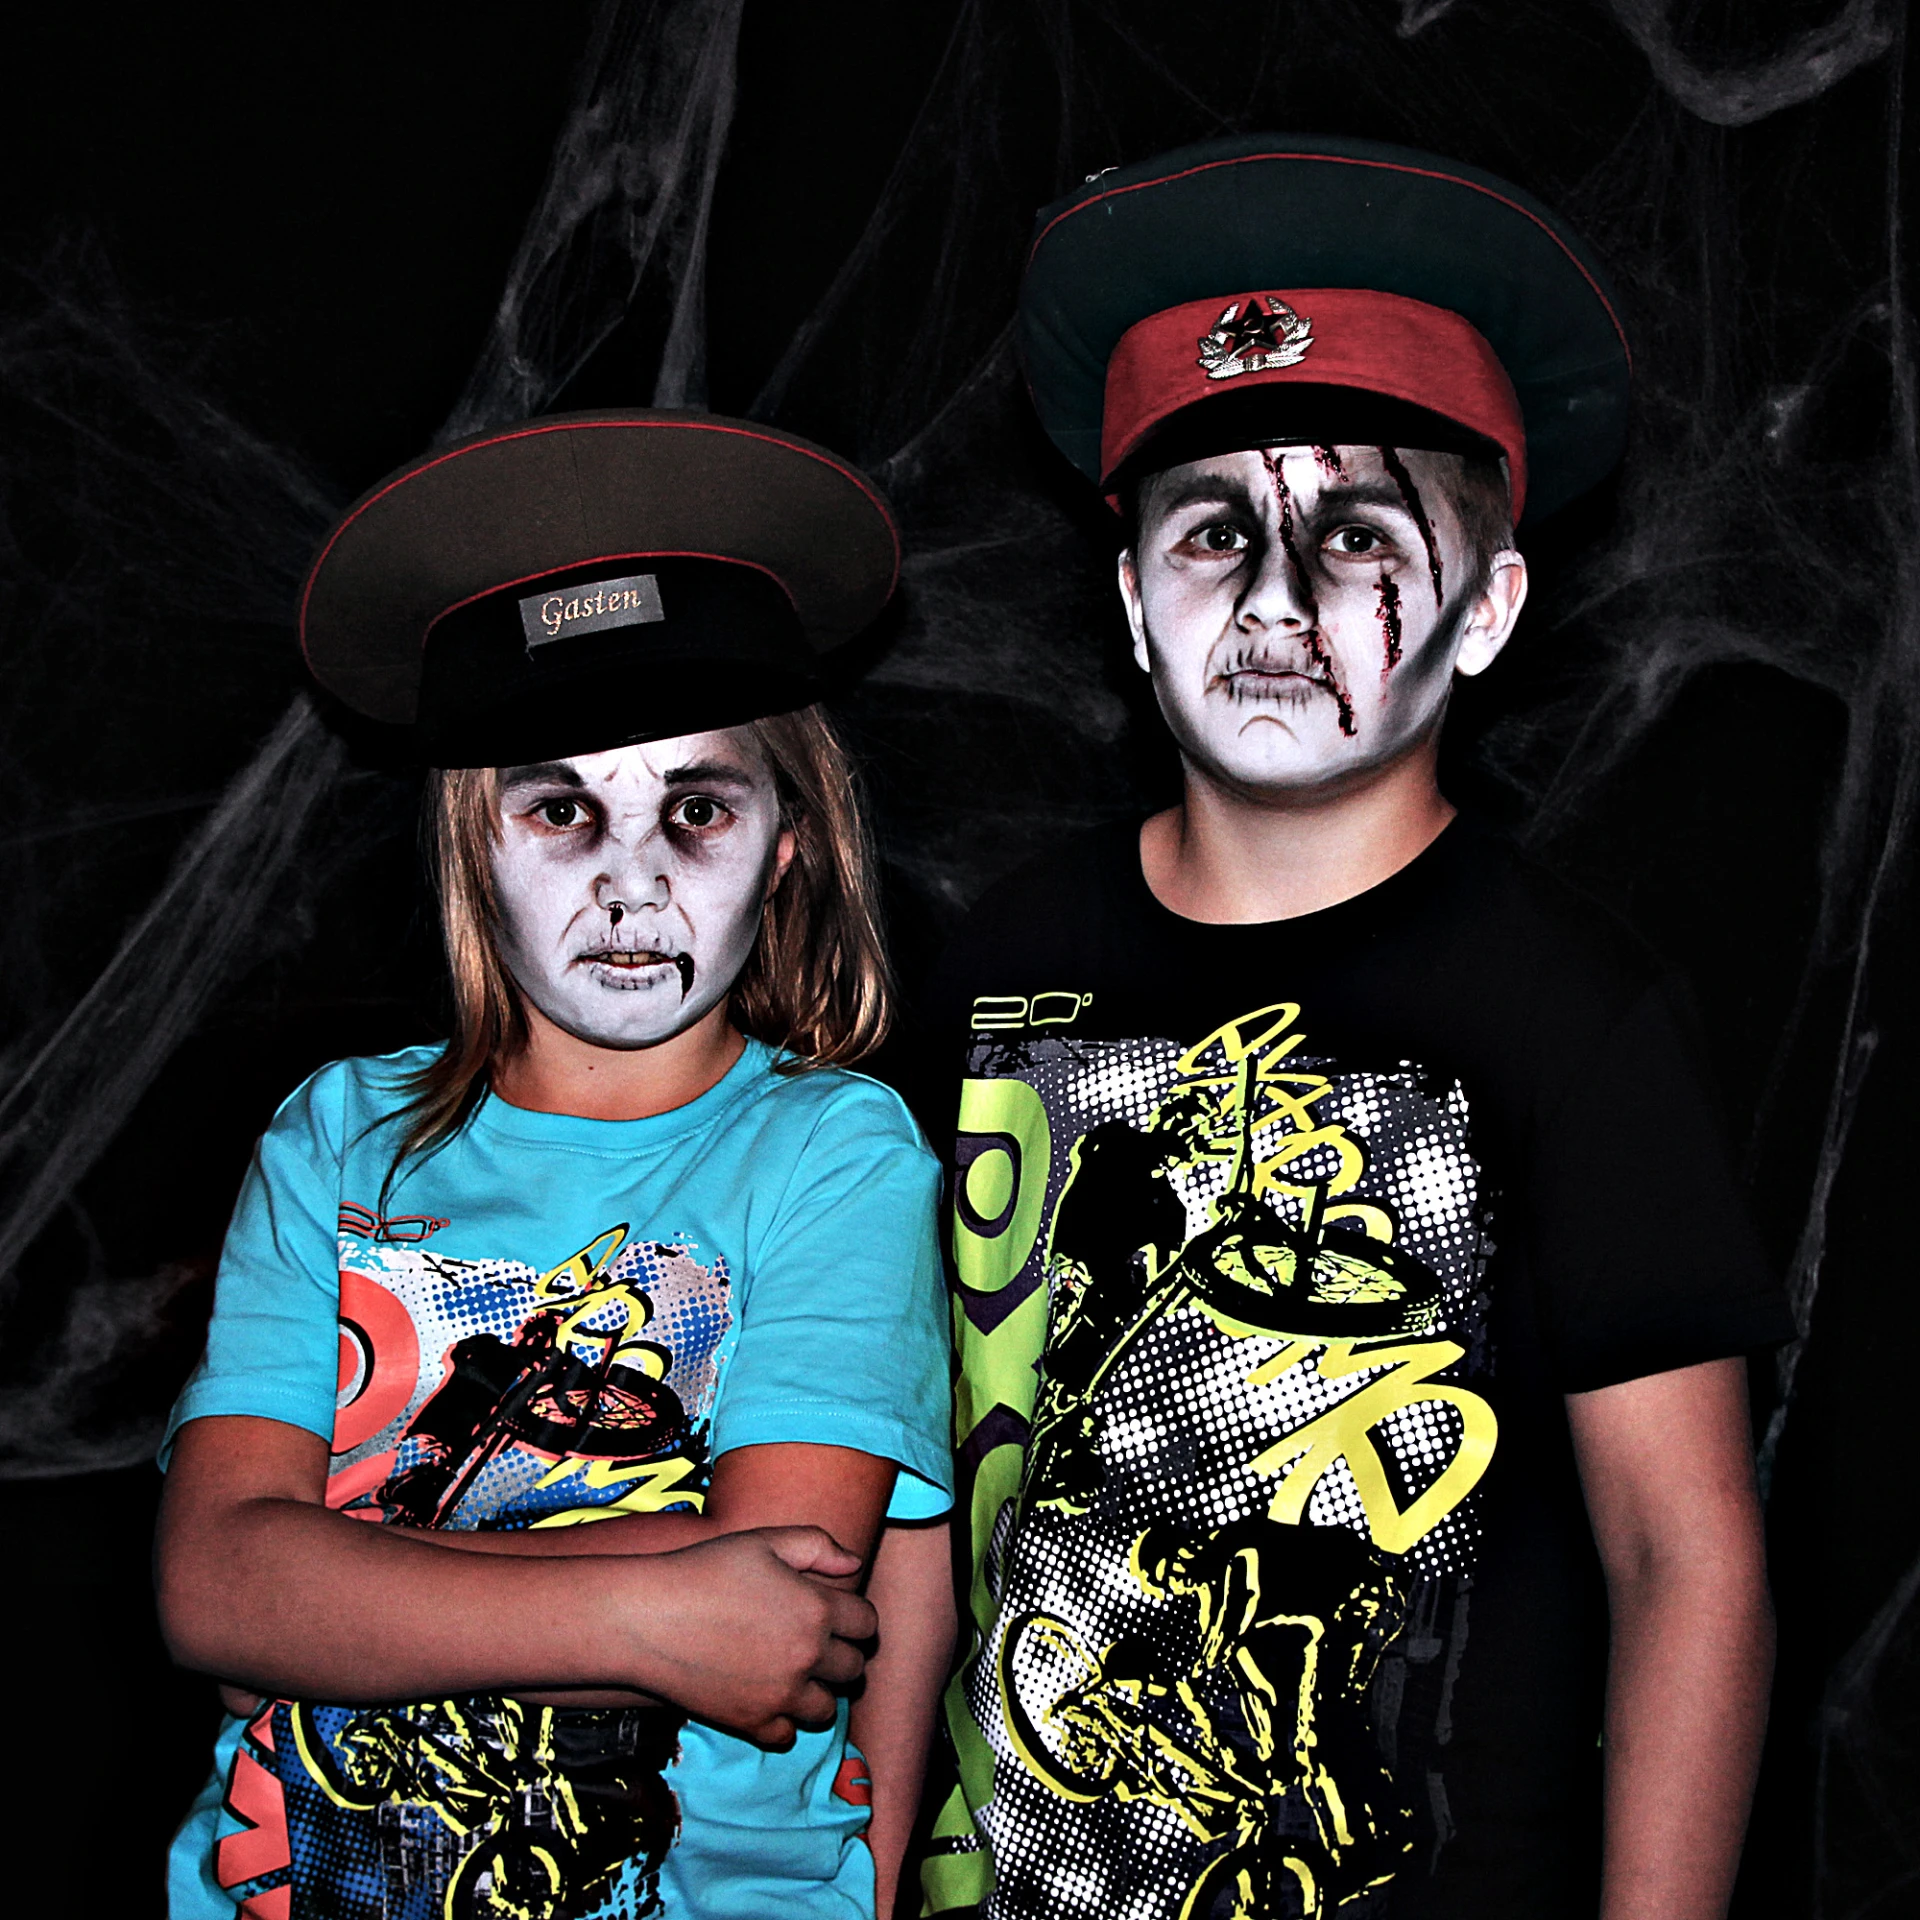 two young children dressed up in face paint